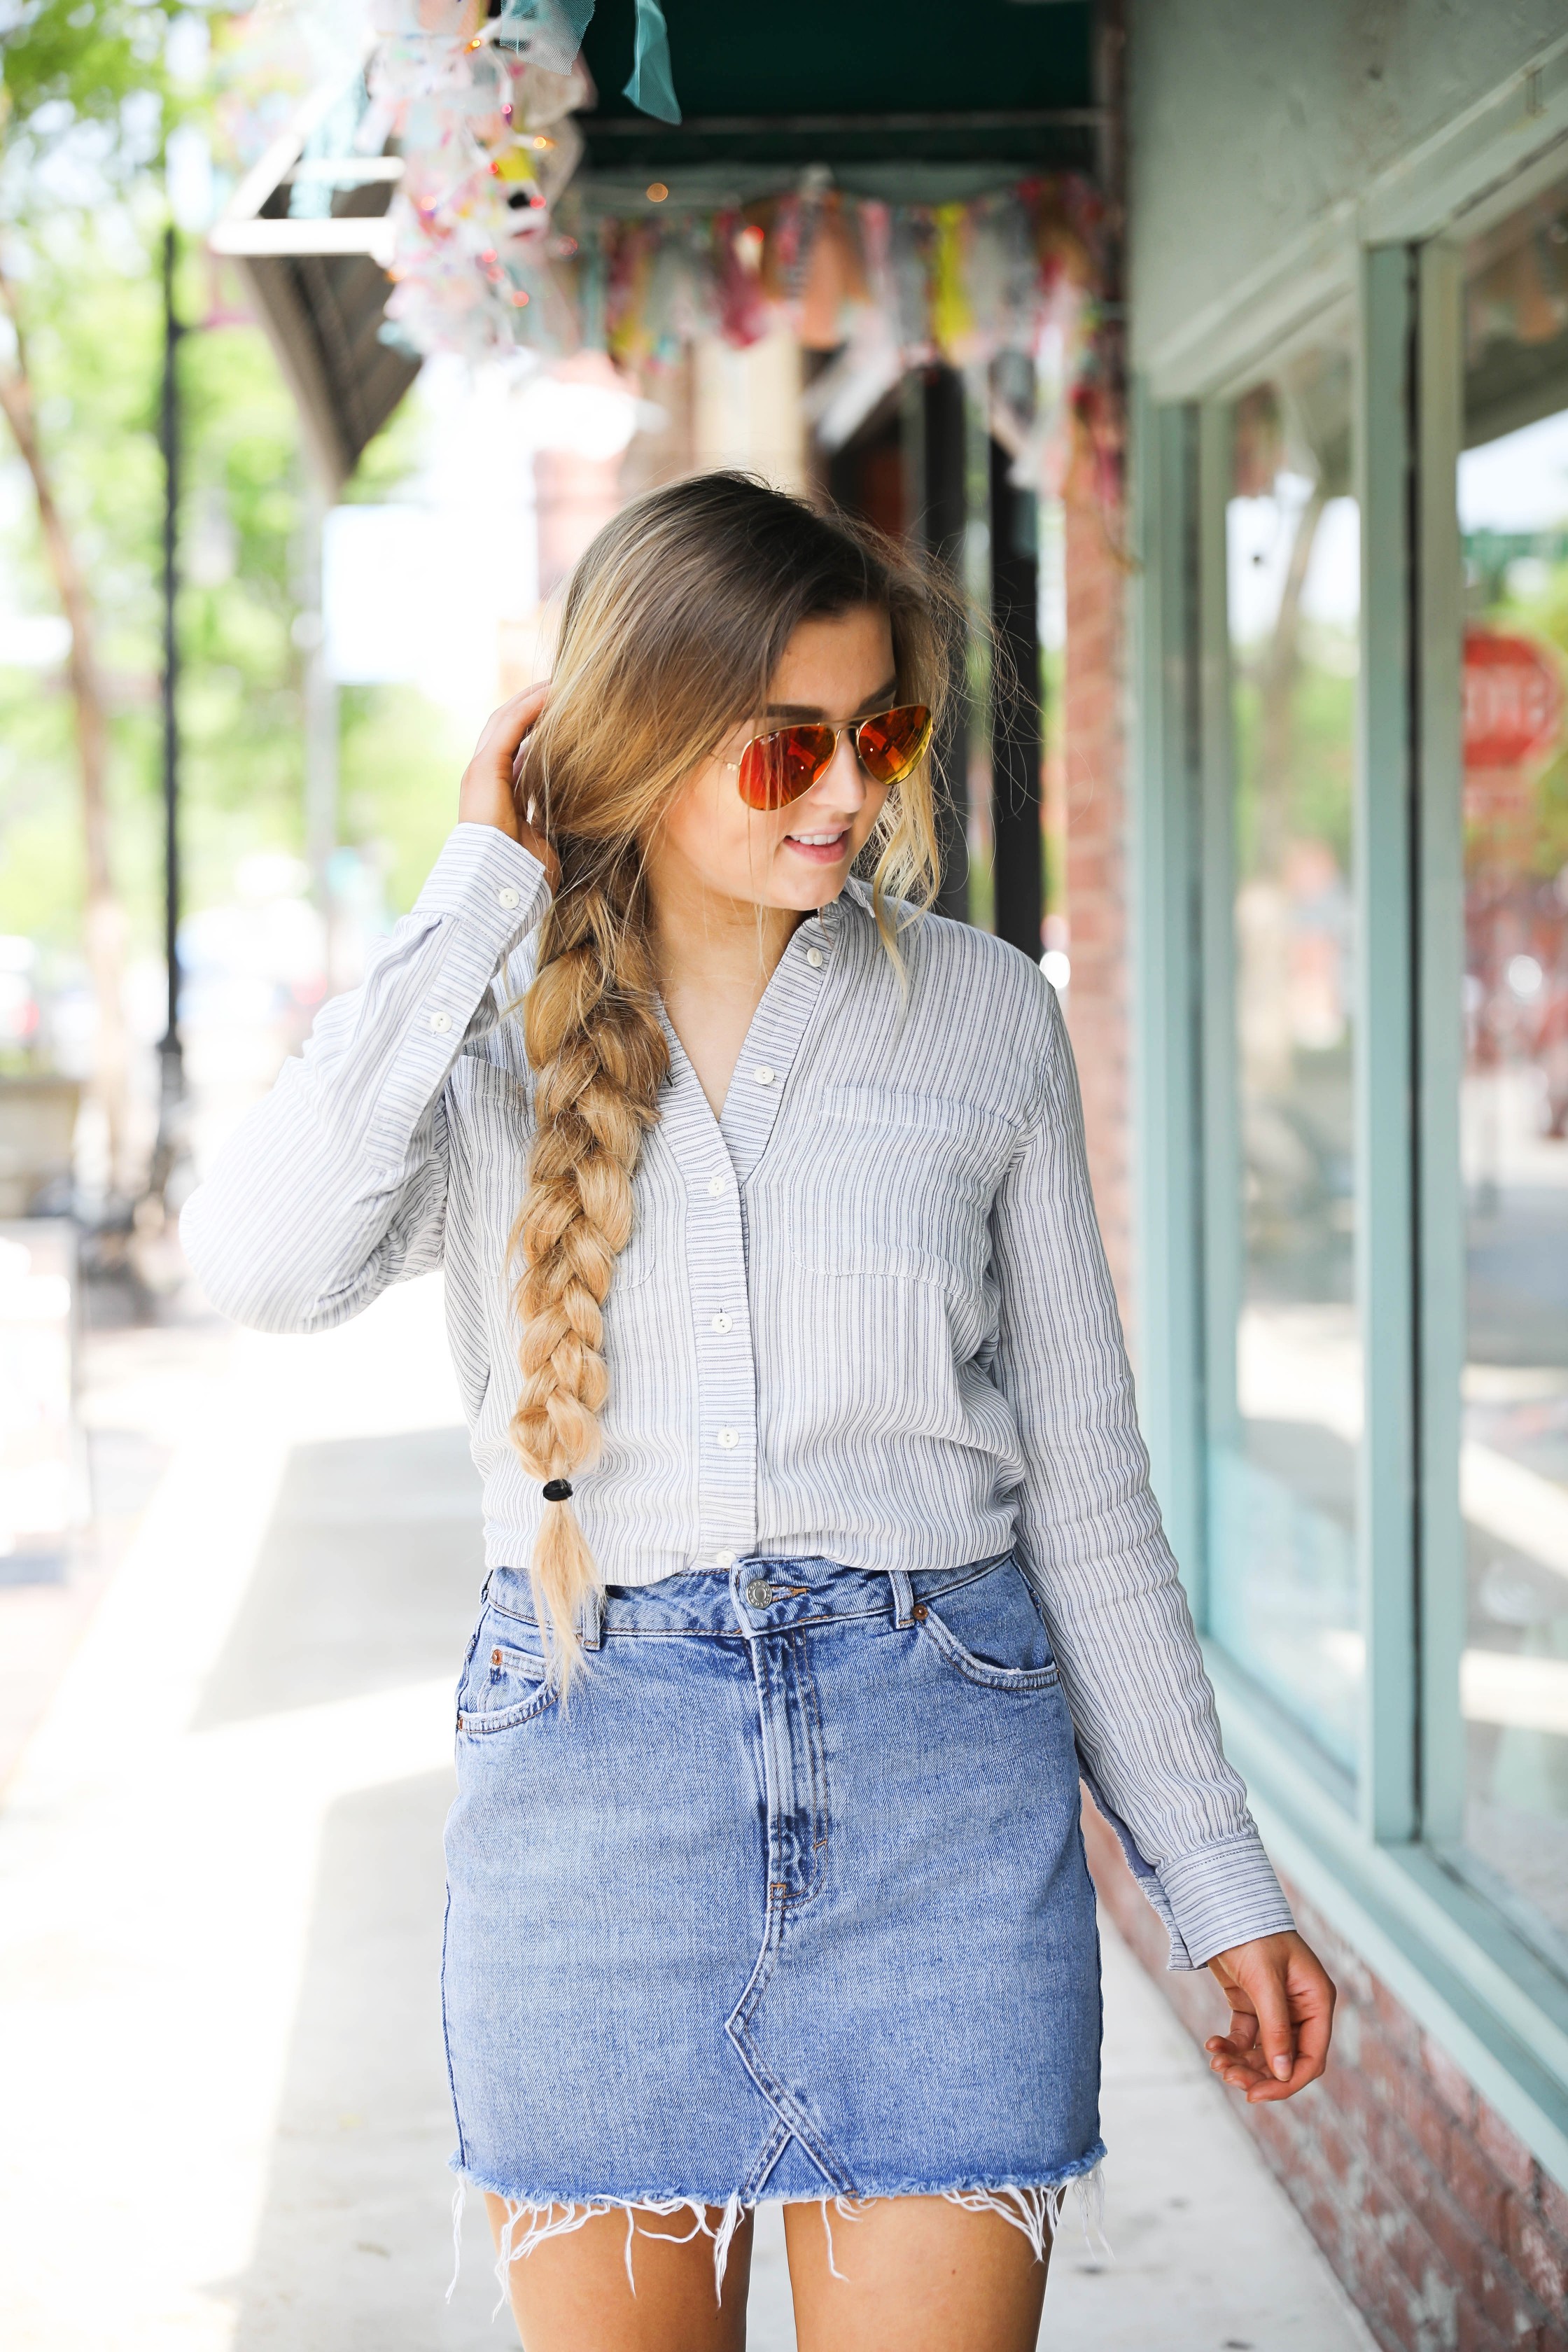 Jean skirt with oxford and ray ban sunglasses on fashion blog daily dose of charm by Lauren Lindmark dailydoseofcharm.com